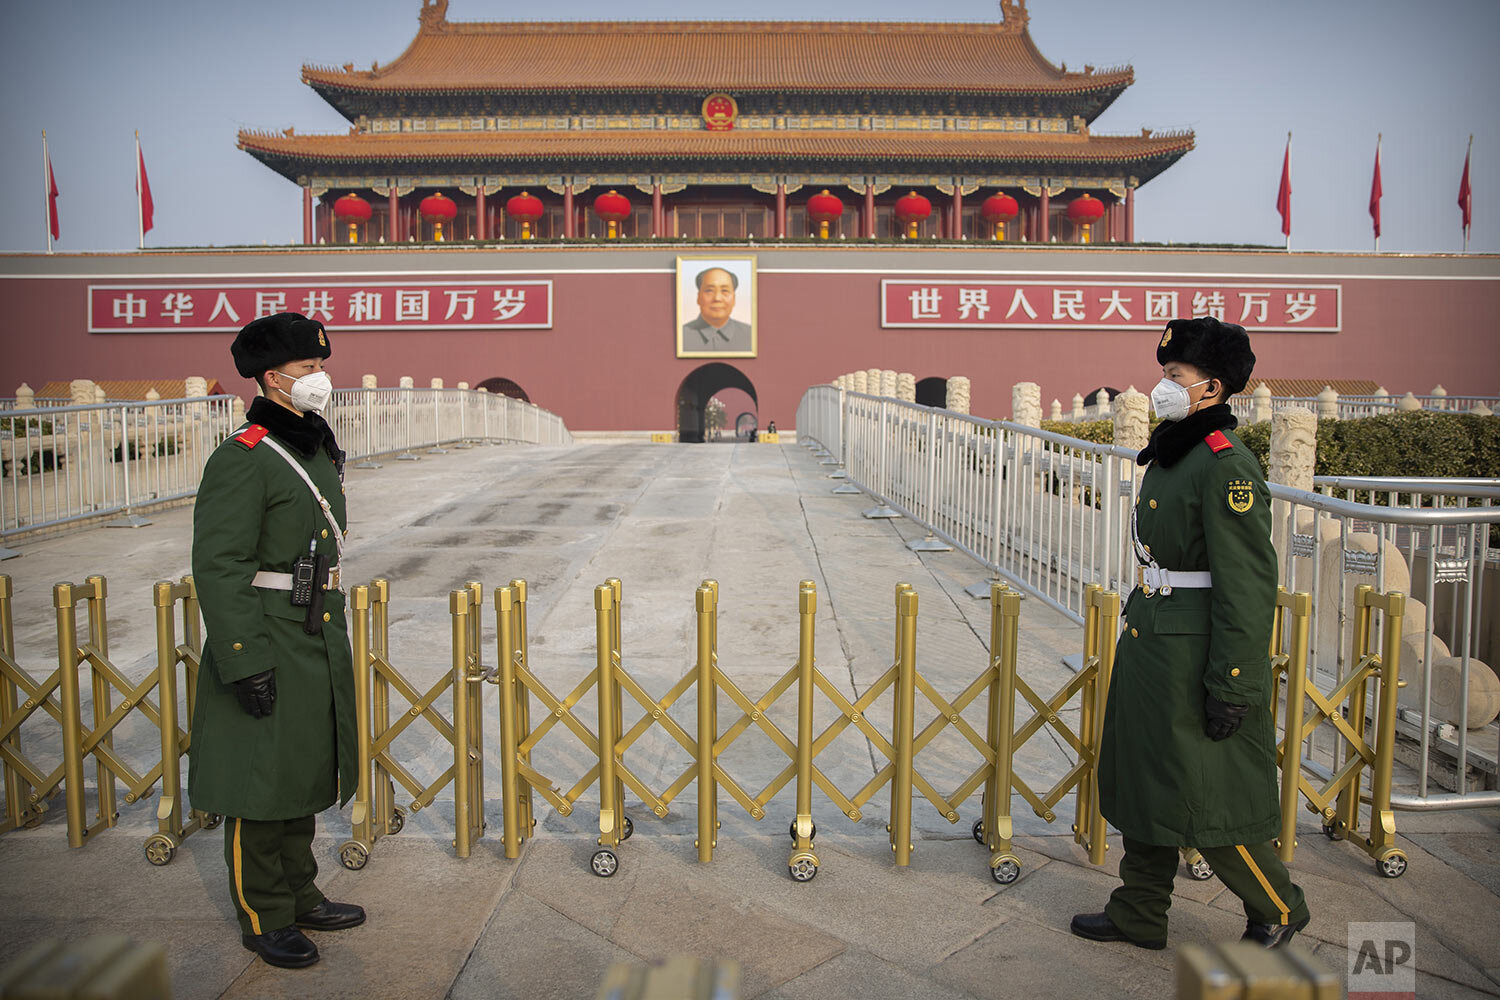  Paramilitary police wear face masks as they stand guard at Tiananmen Gate adjacent to Tiananmen Square in Beijing, Monday, Jan. 27, 2020. (AP Photo/Mark Schiefelbein) 